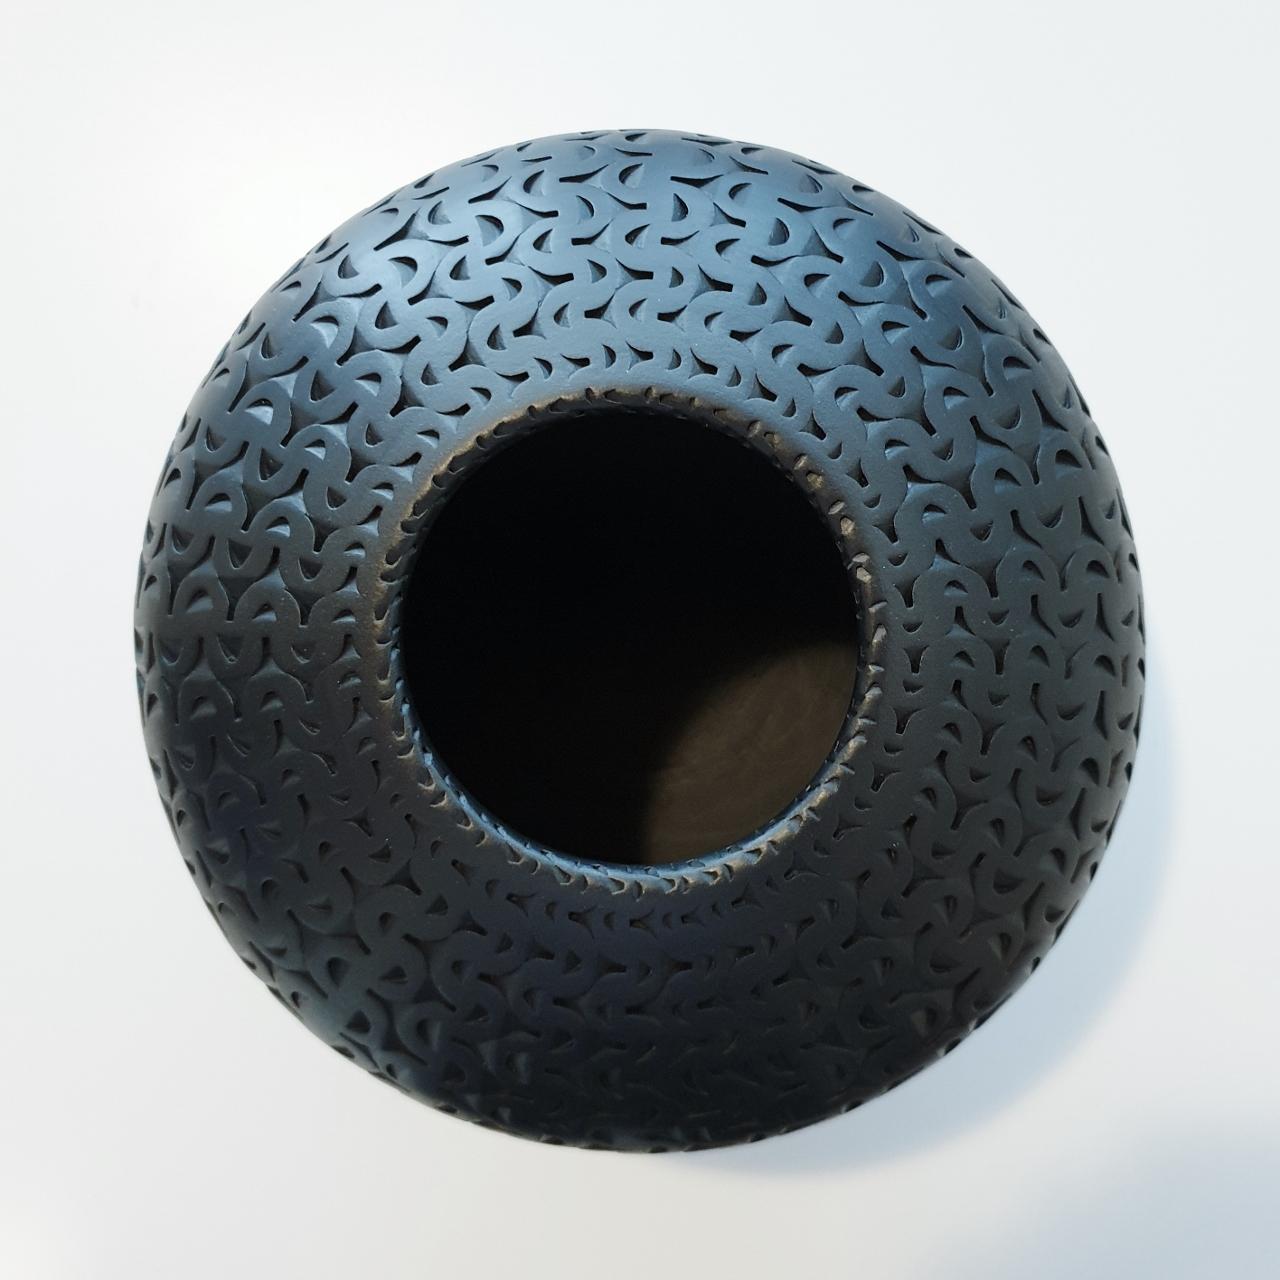 This Black Buckle Vessel is a unique medium size contemporary modern ceramic vase shaped vessel by US-artist Michael Wisner. The hand-coiled shape of this object is simple but very elegant, complementing the intense patterning made through a very